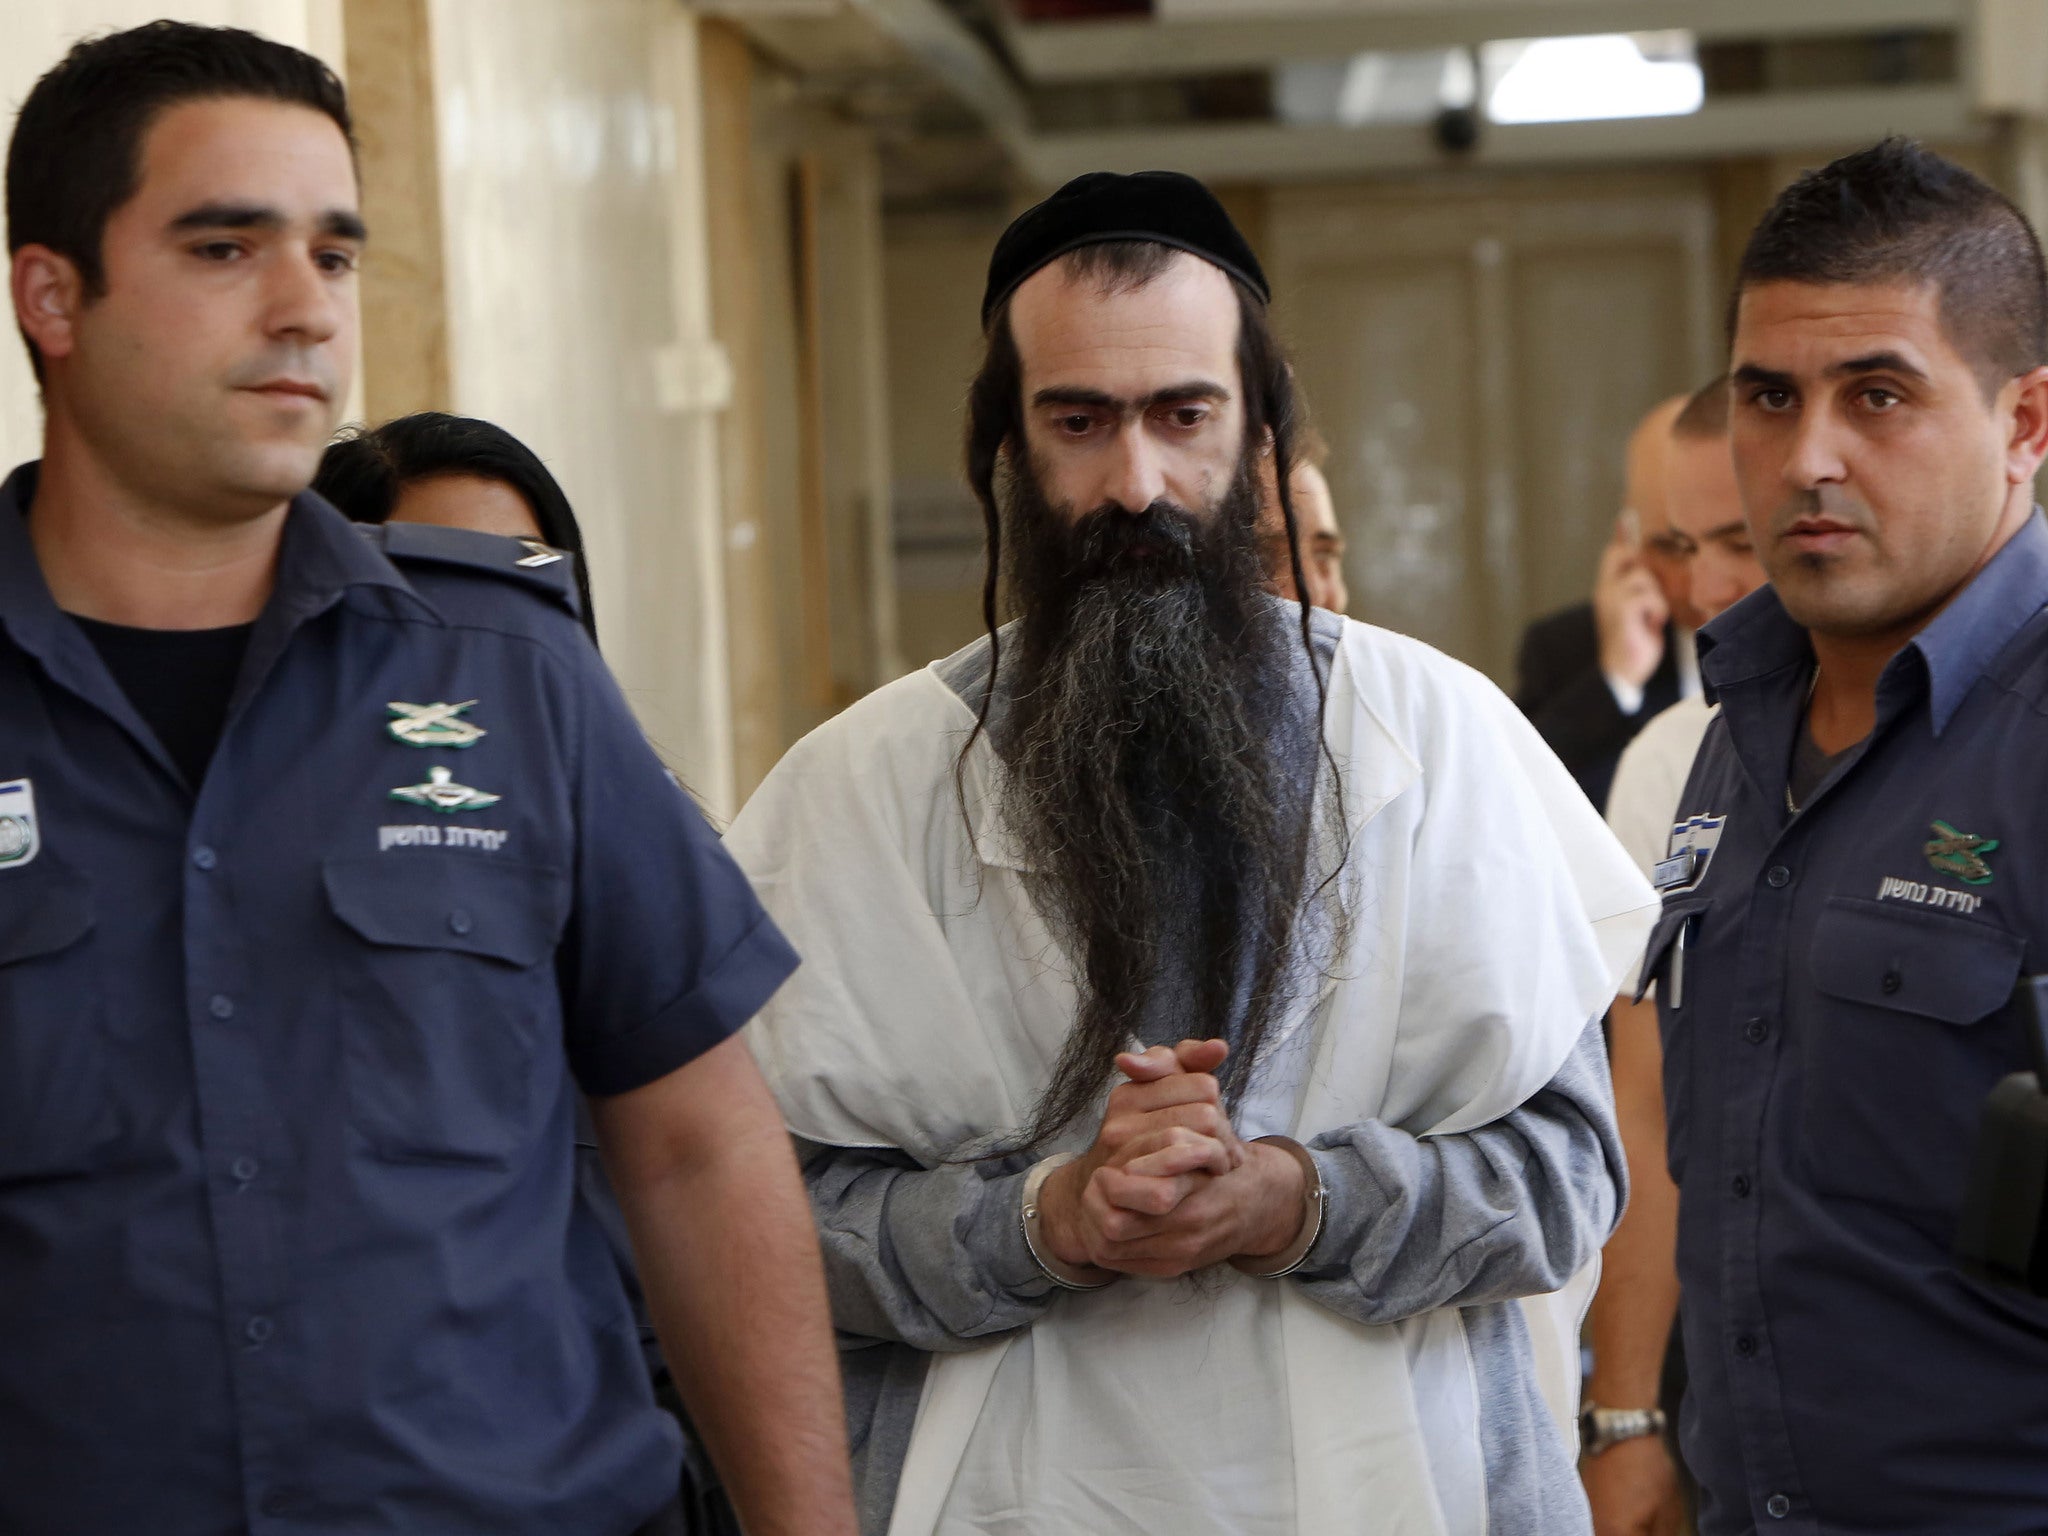 Yishai Schlissel was arrested after six people were stabbed at a Gay Pride event in Jerusalem